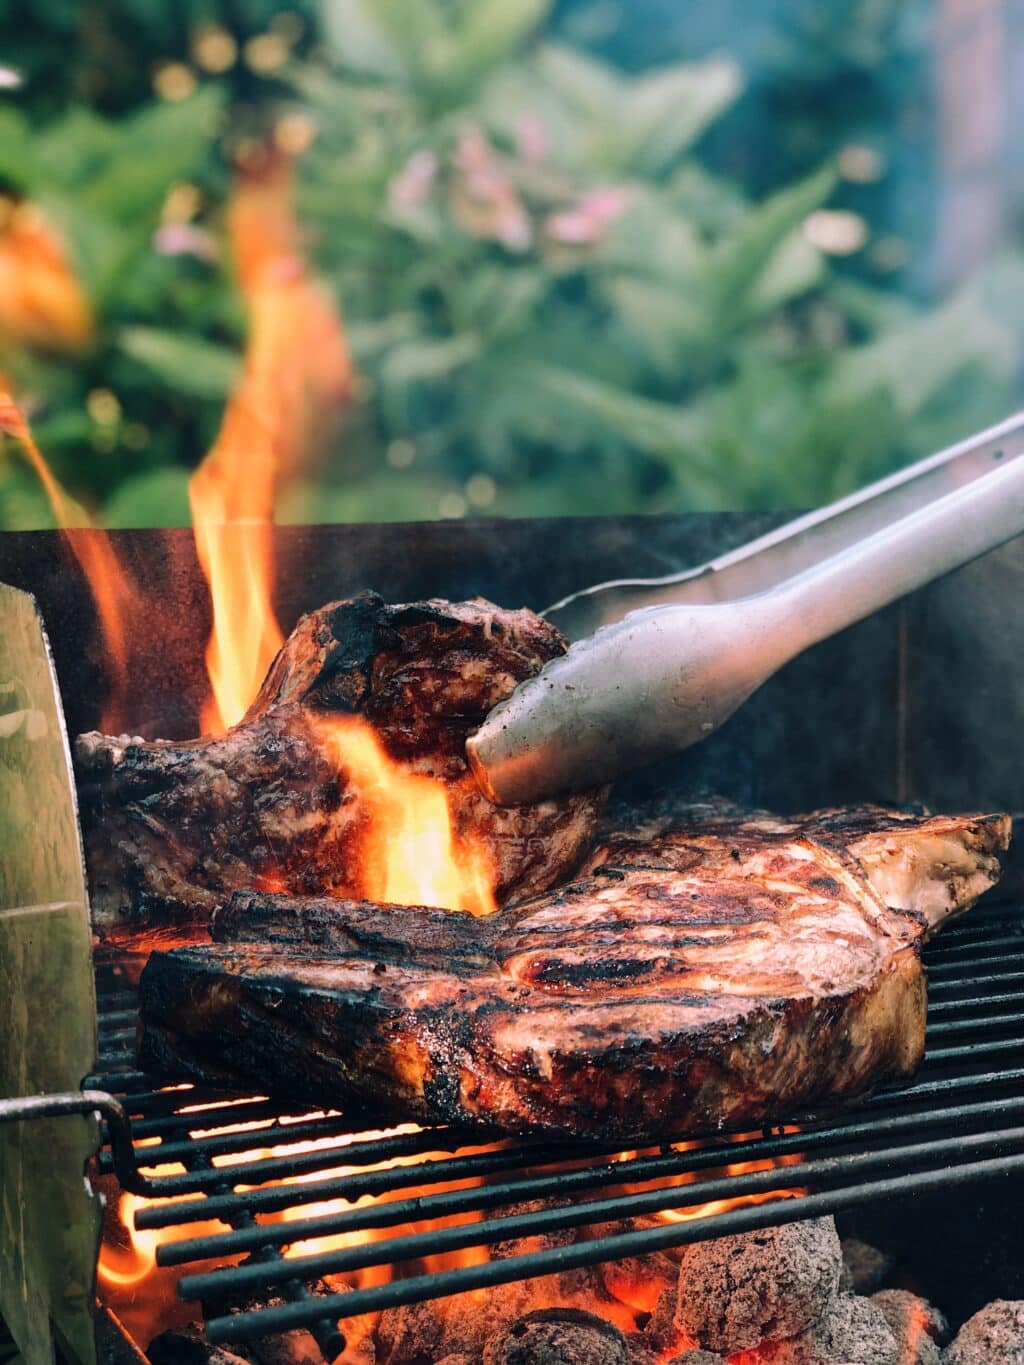 https://bitrebels.com/wp-content/uploads/2023/07/9-essential-tips-proper-bbq-grill-cleaning-article-image.jpg